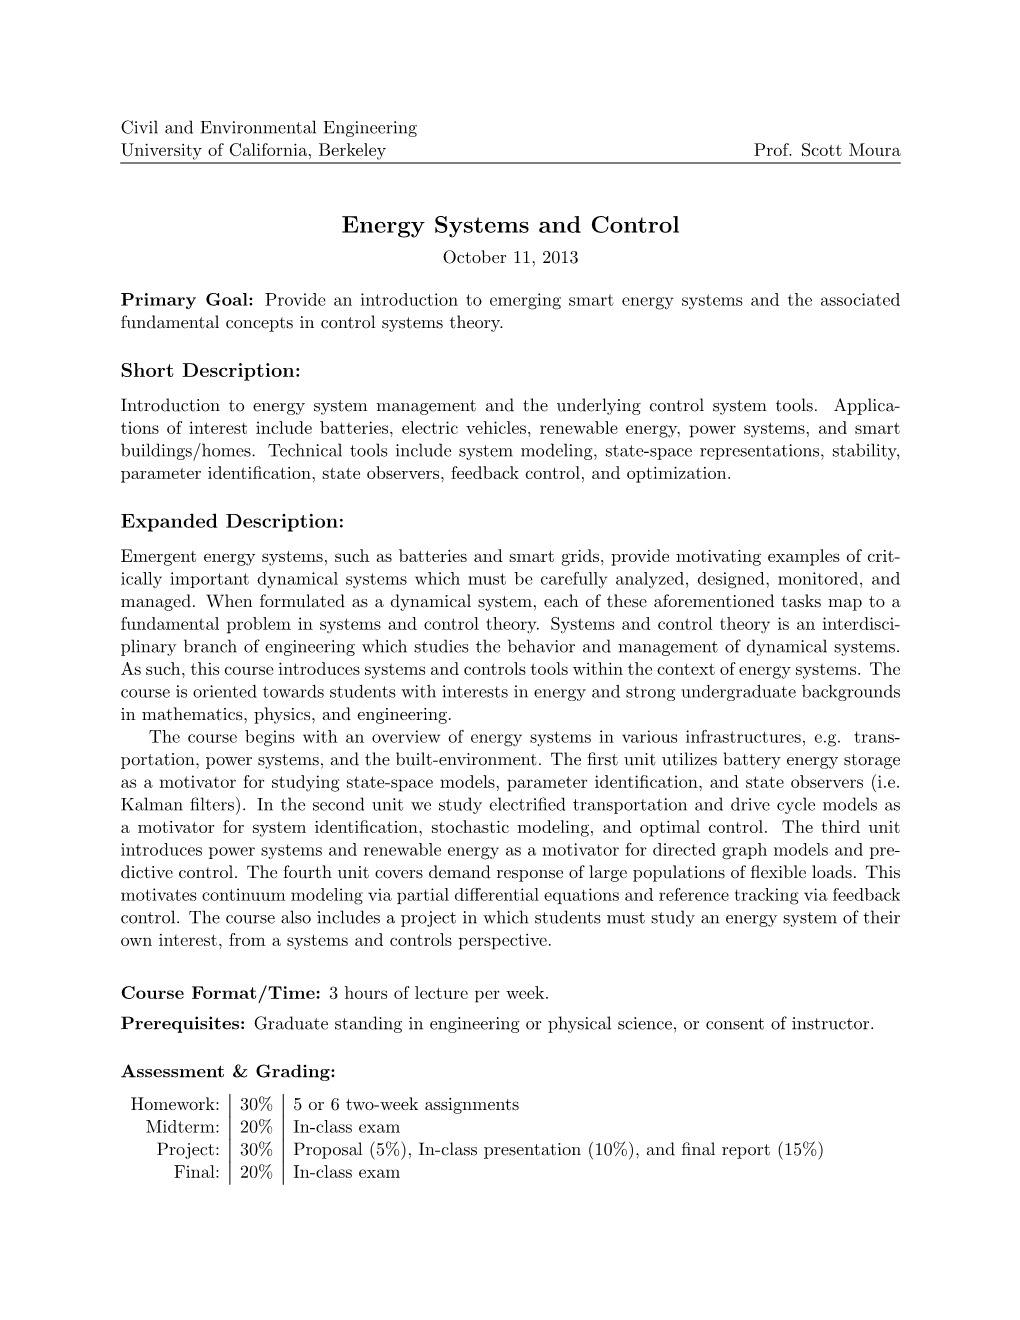 Energy Systems and Control October 11, 2013